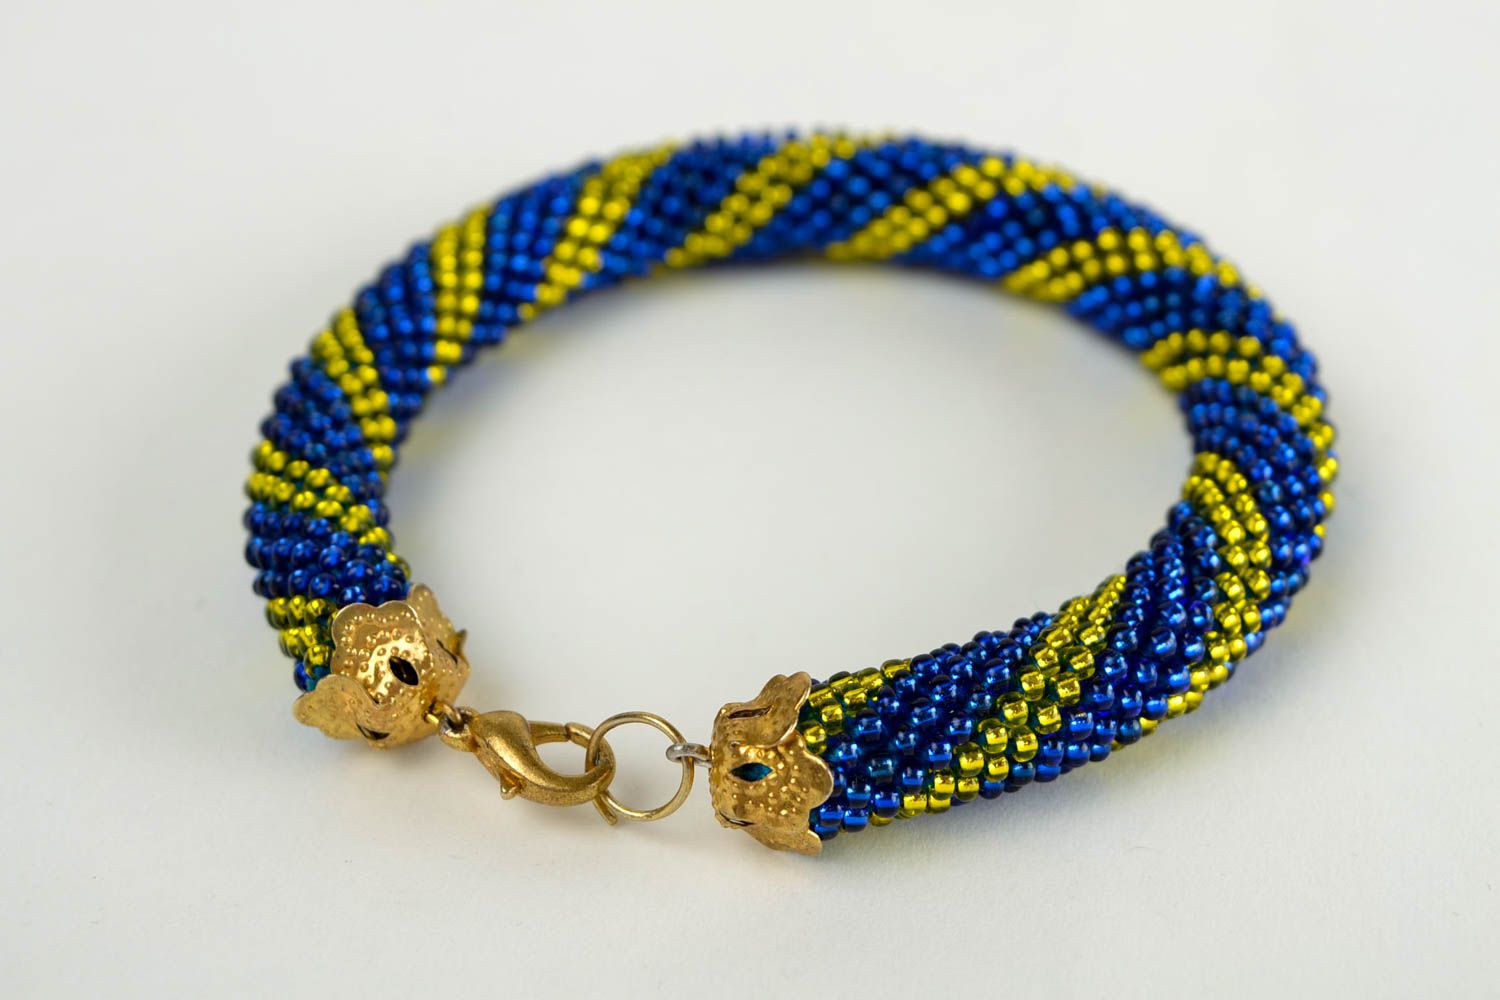 Beaded cord bracelet in dark blue and yellow beads for young girls photo 5